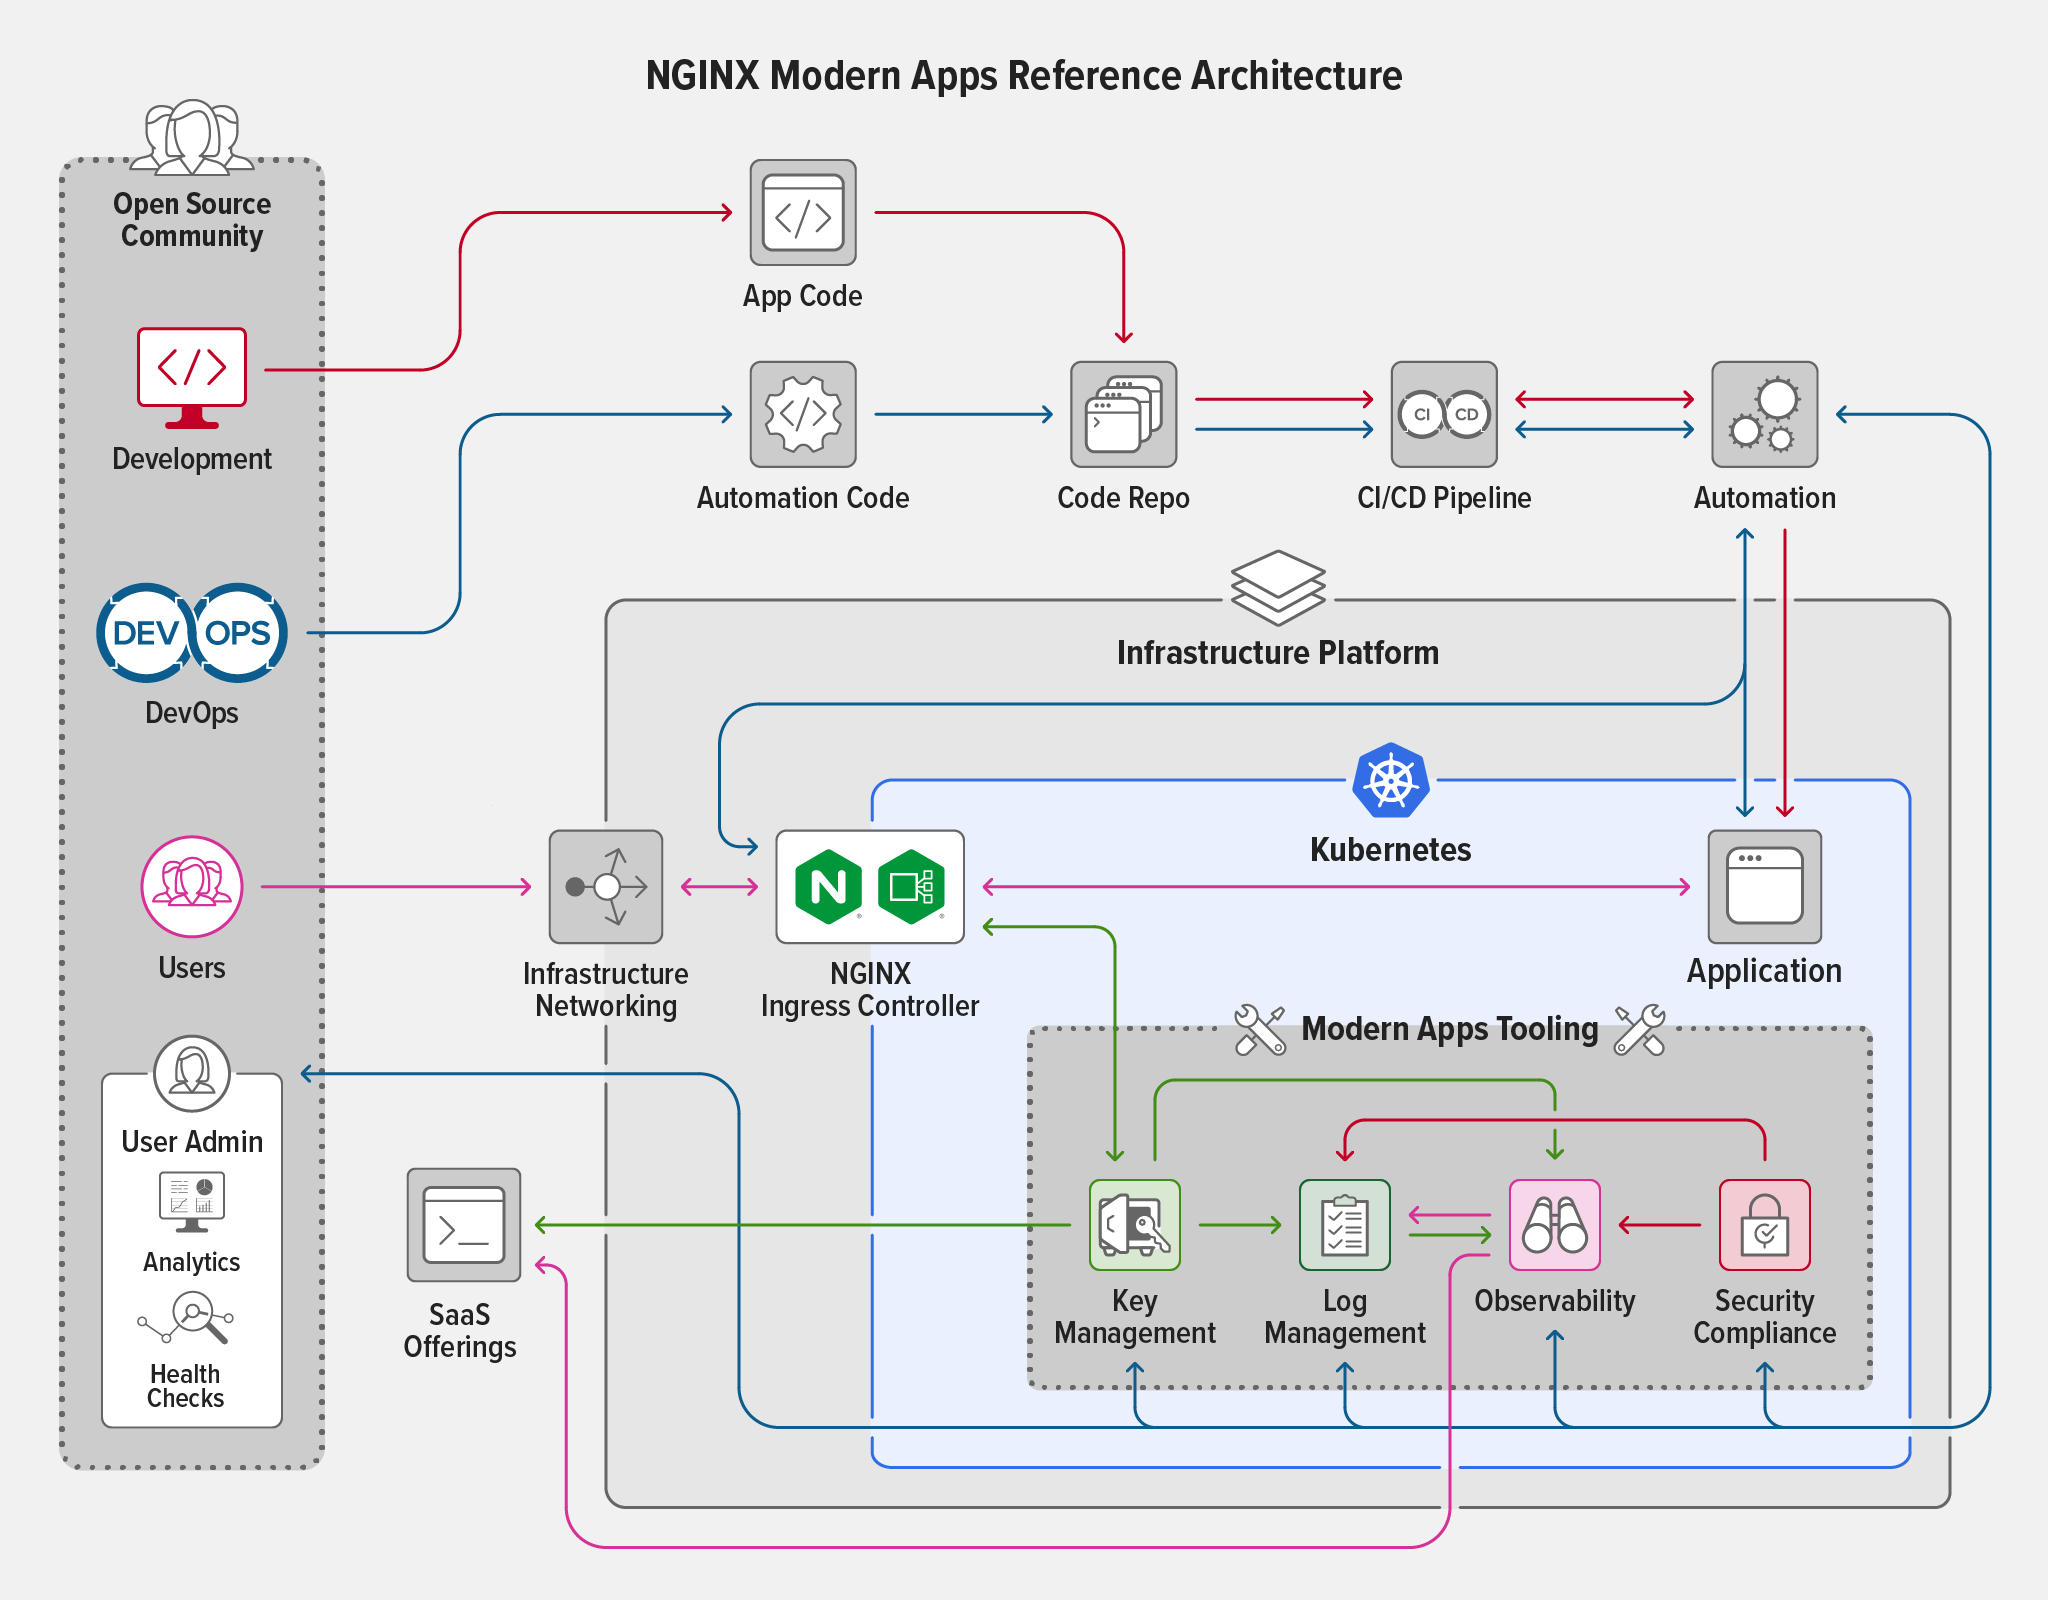 Topology diagram for version 1.0.0 of the NGINX Modern Apps Reference Architecture